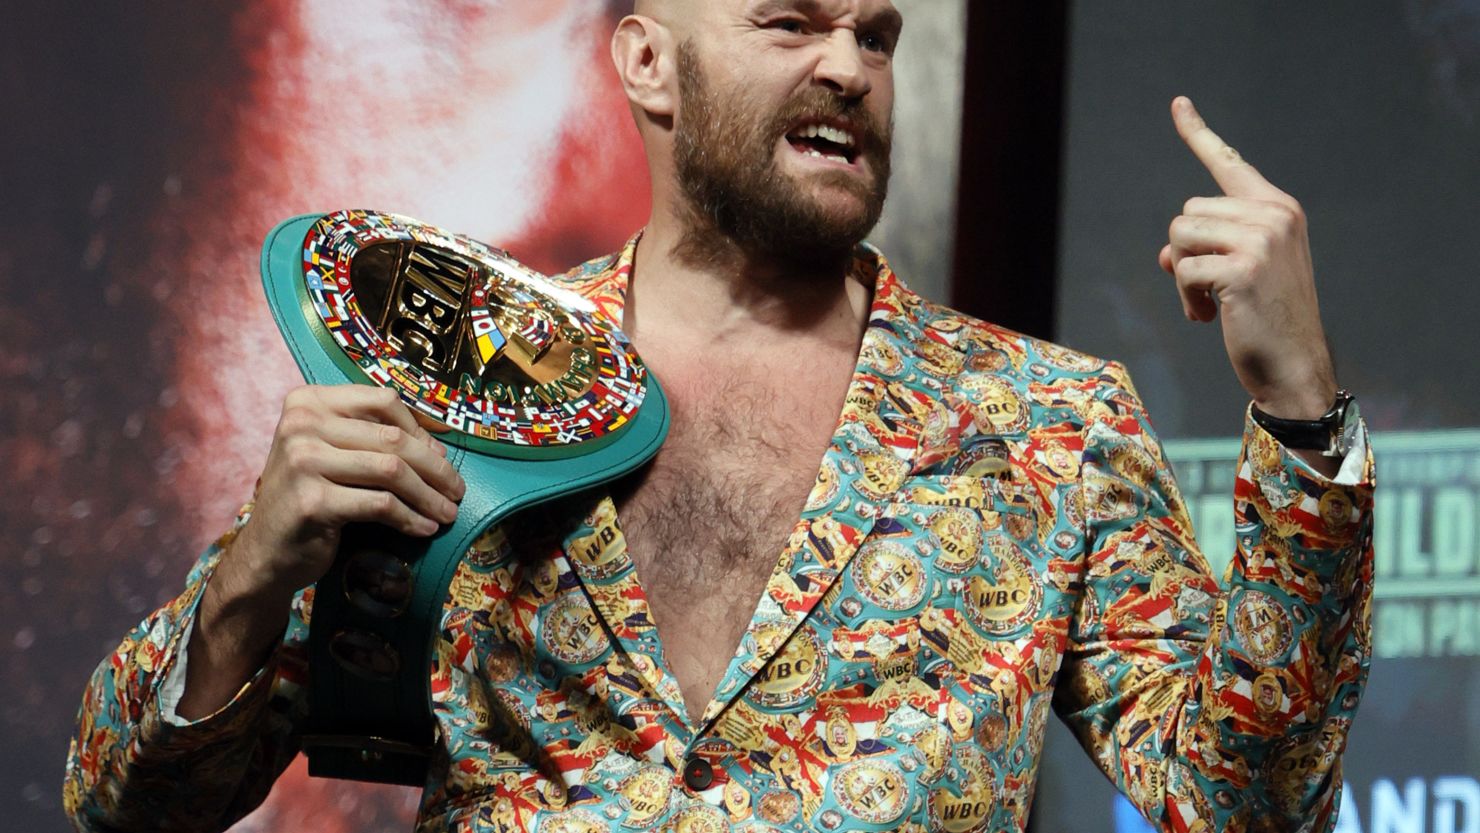 "Your legacy will be in tatters," Tyson Fury told Deontay Wilder.